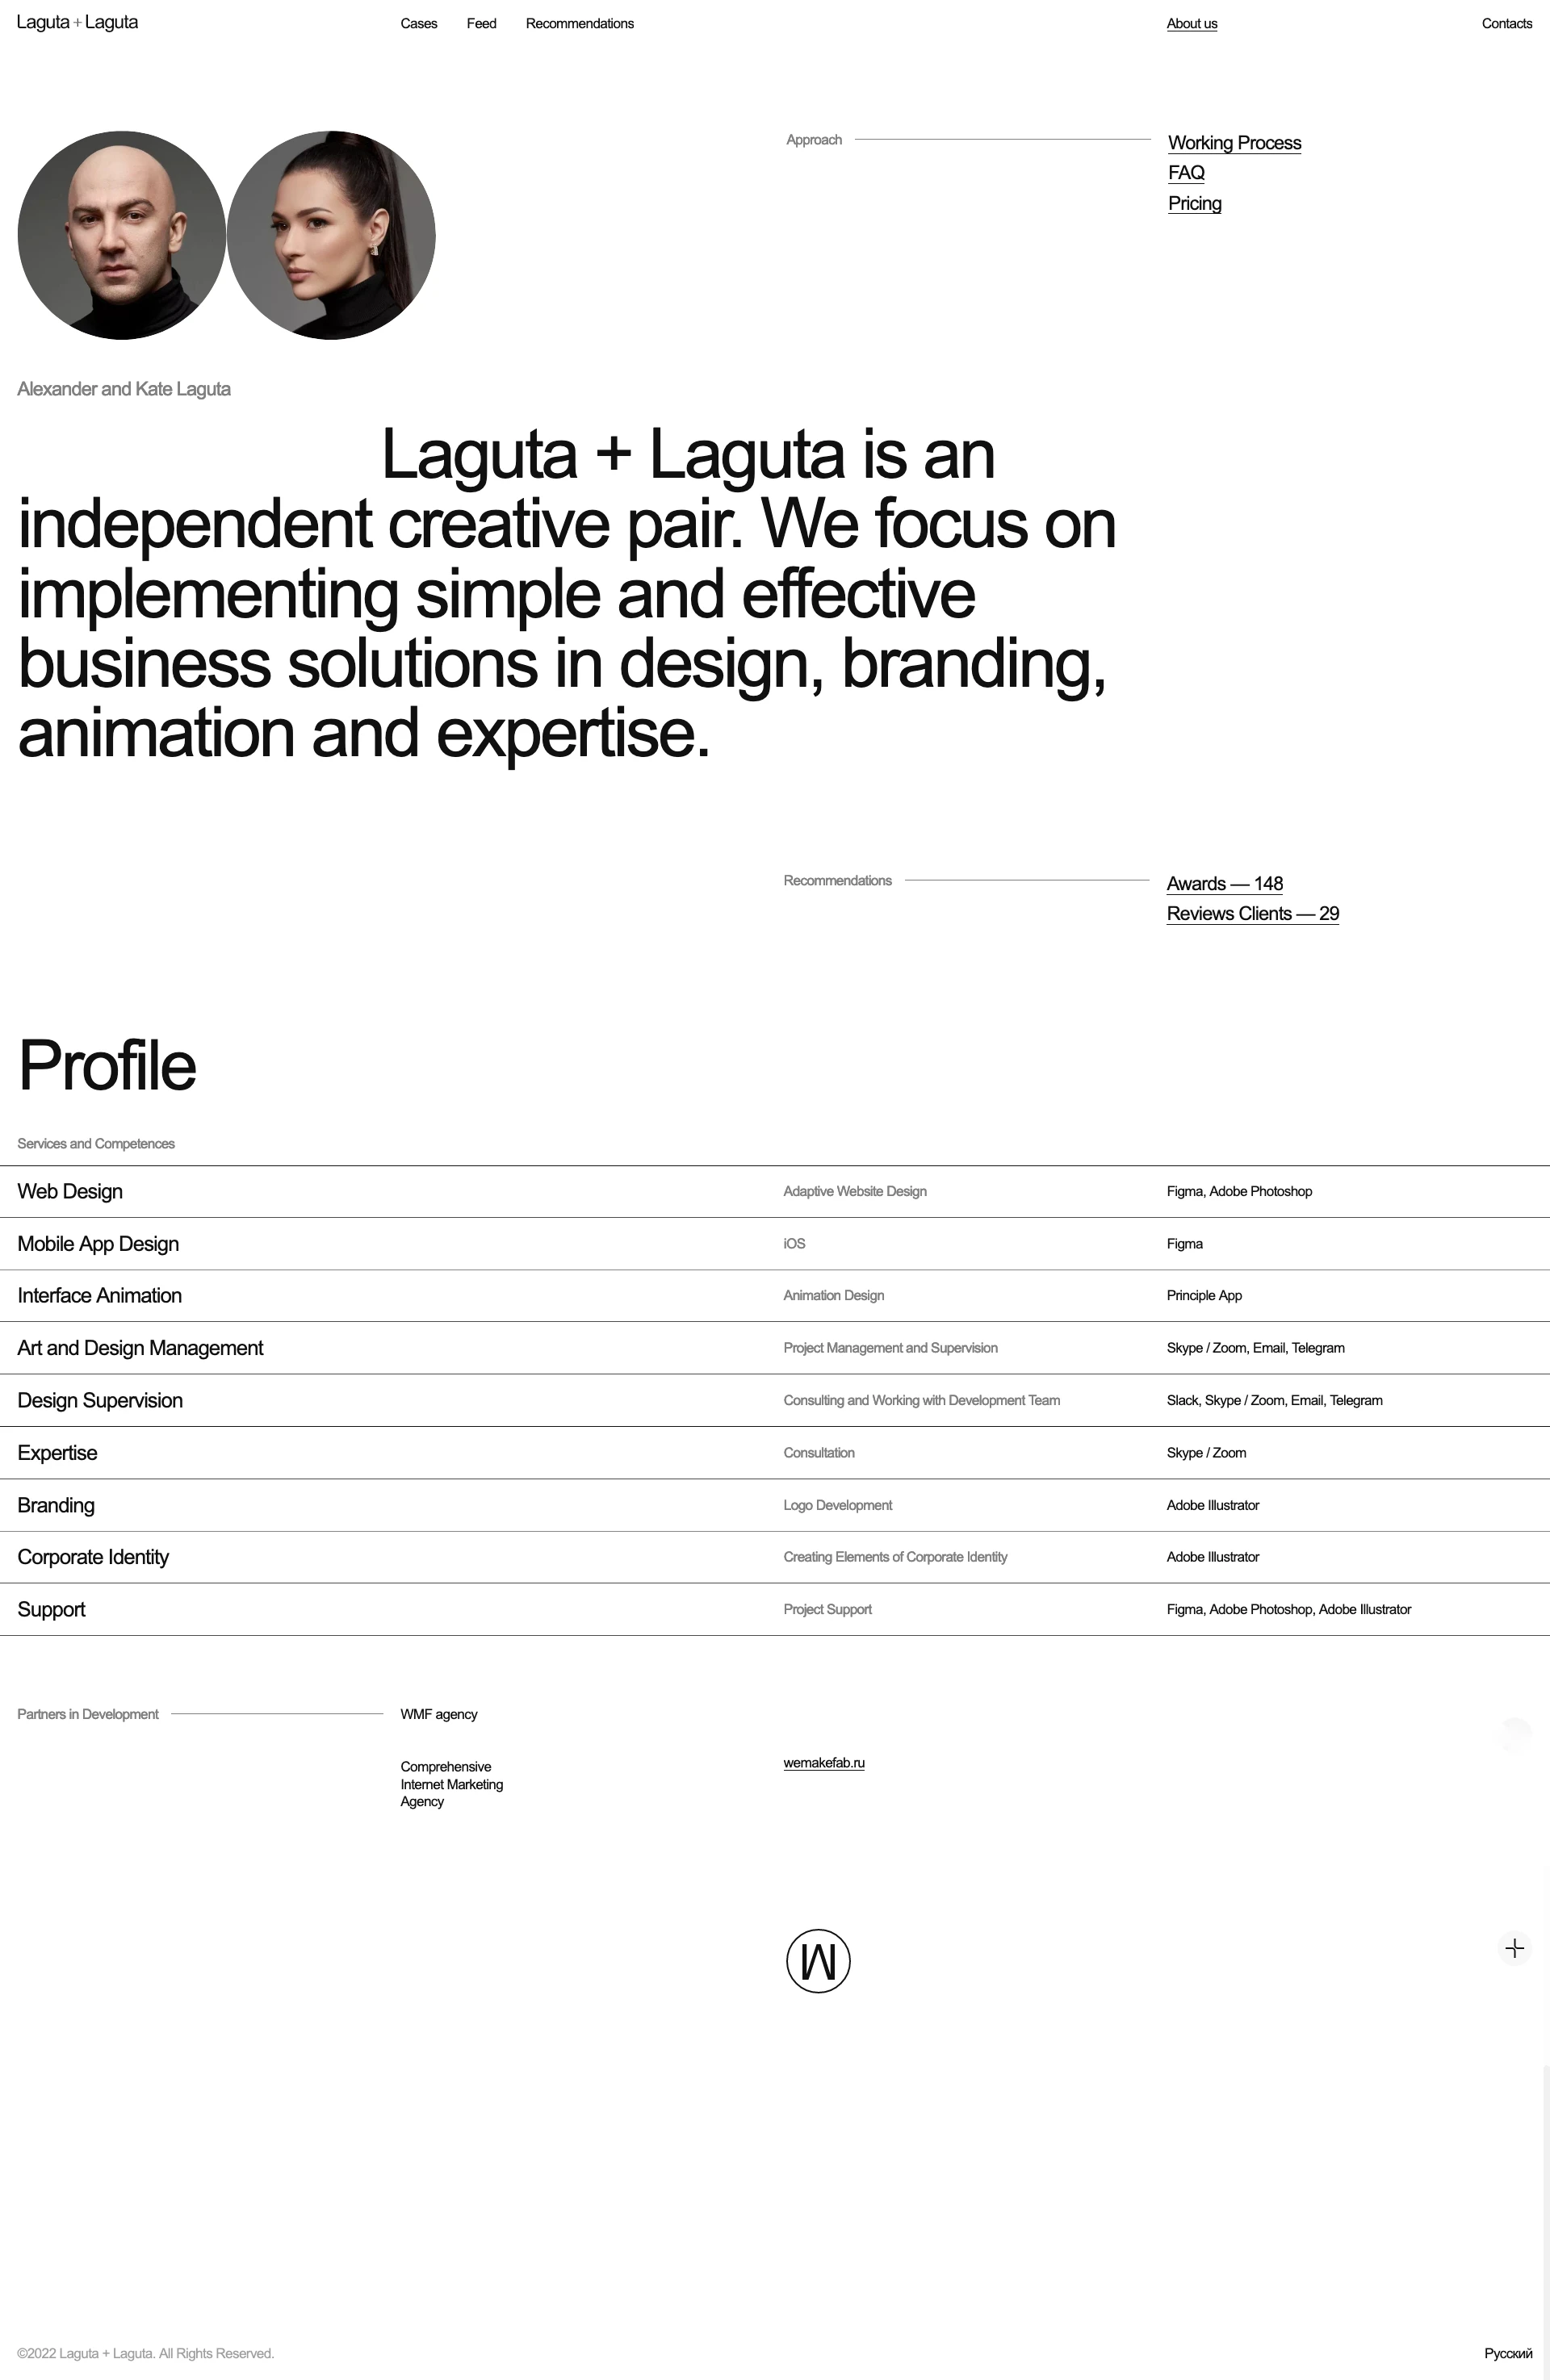 Laguta+Laguta Landing Page Example: Laguta + Laguta is an independent creative pair. We focus on implementing simple and effective business solutions in design, branding, animation and expertise.